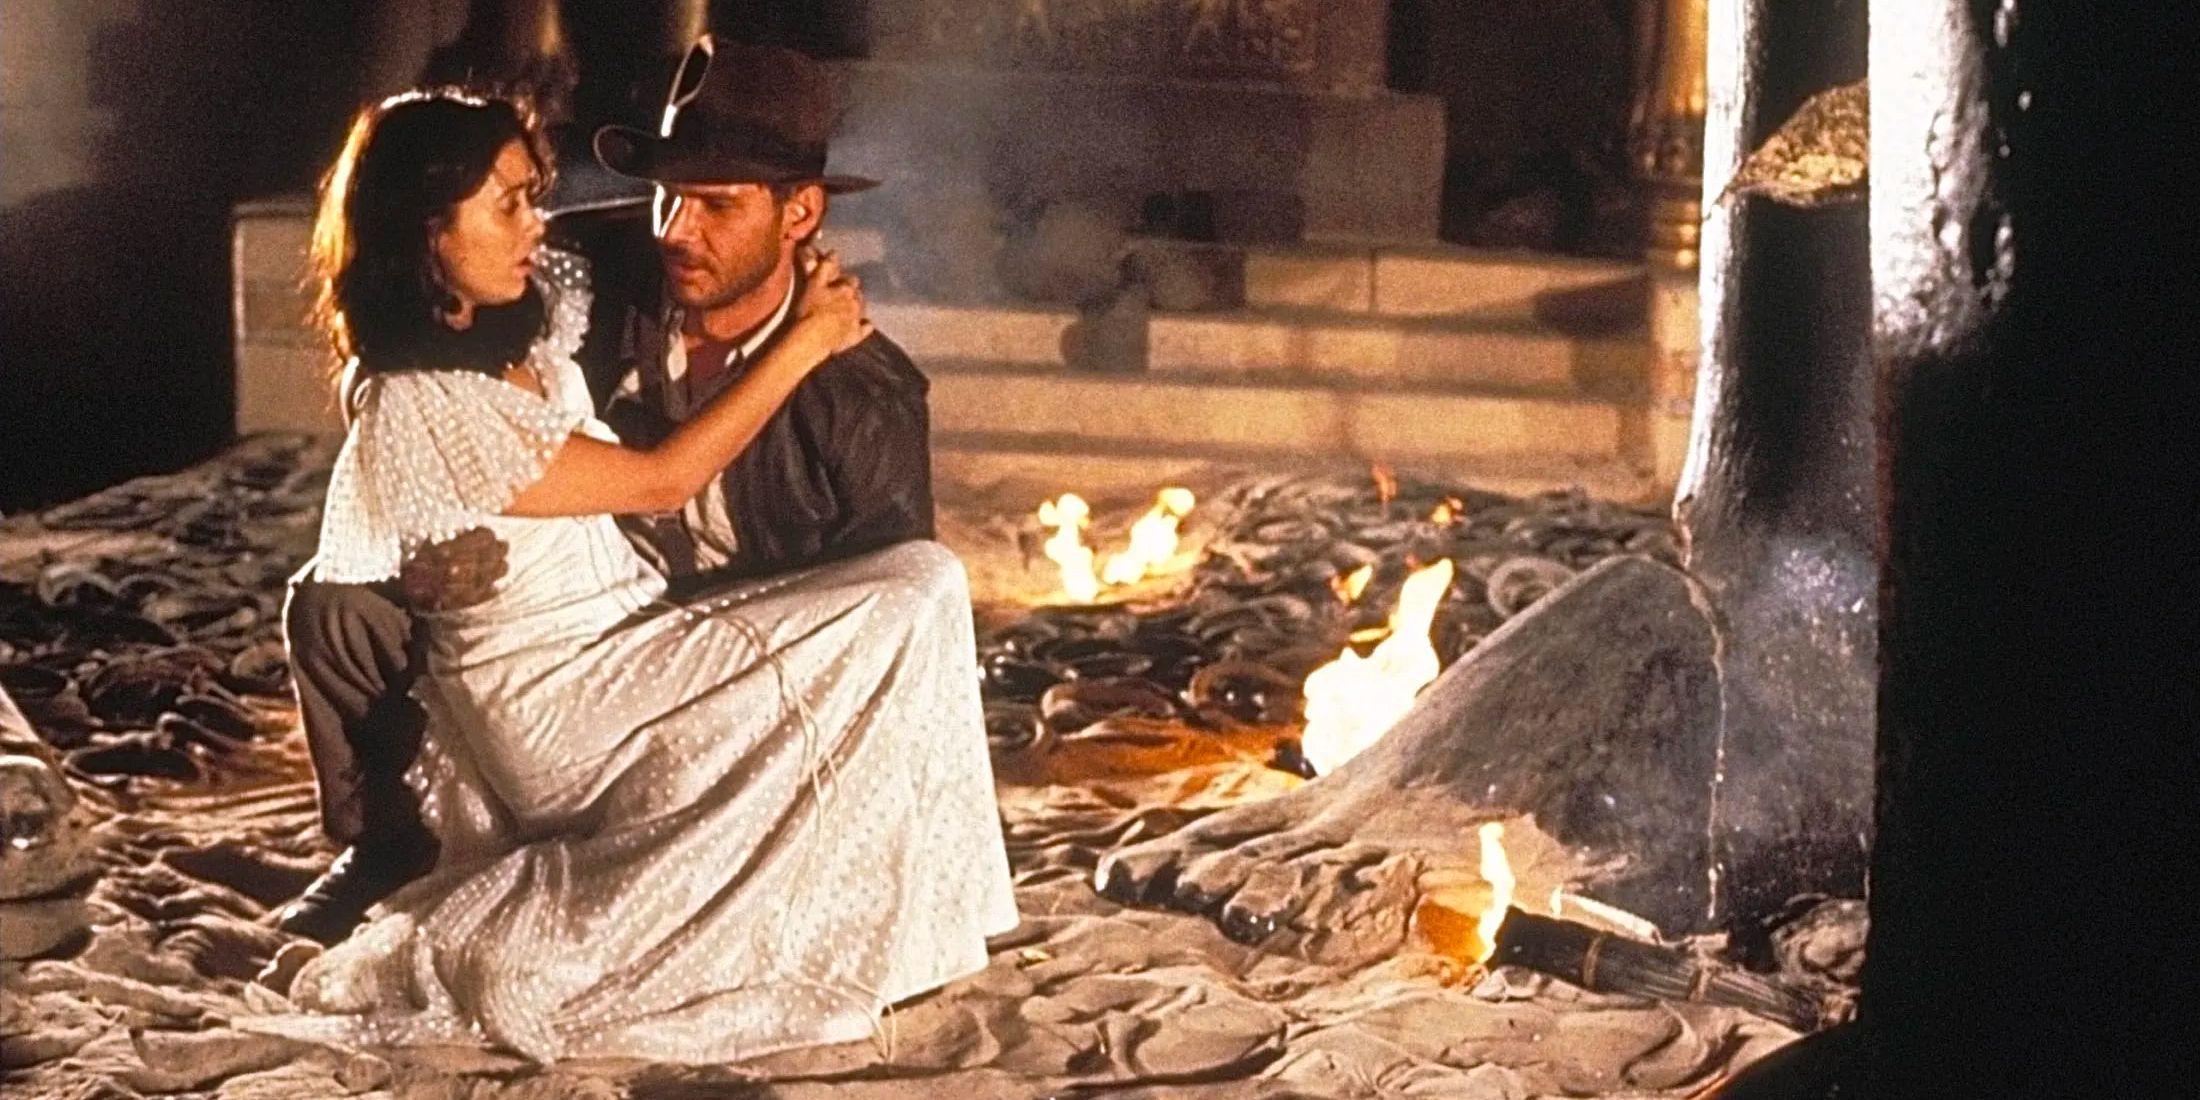 Indiana Jones and Marion are trapped in a snake-infested pit. 